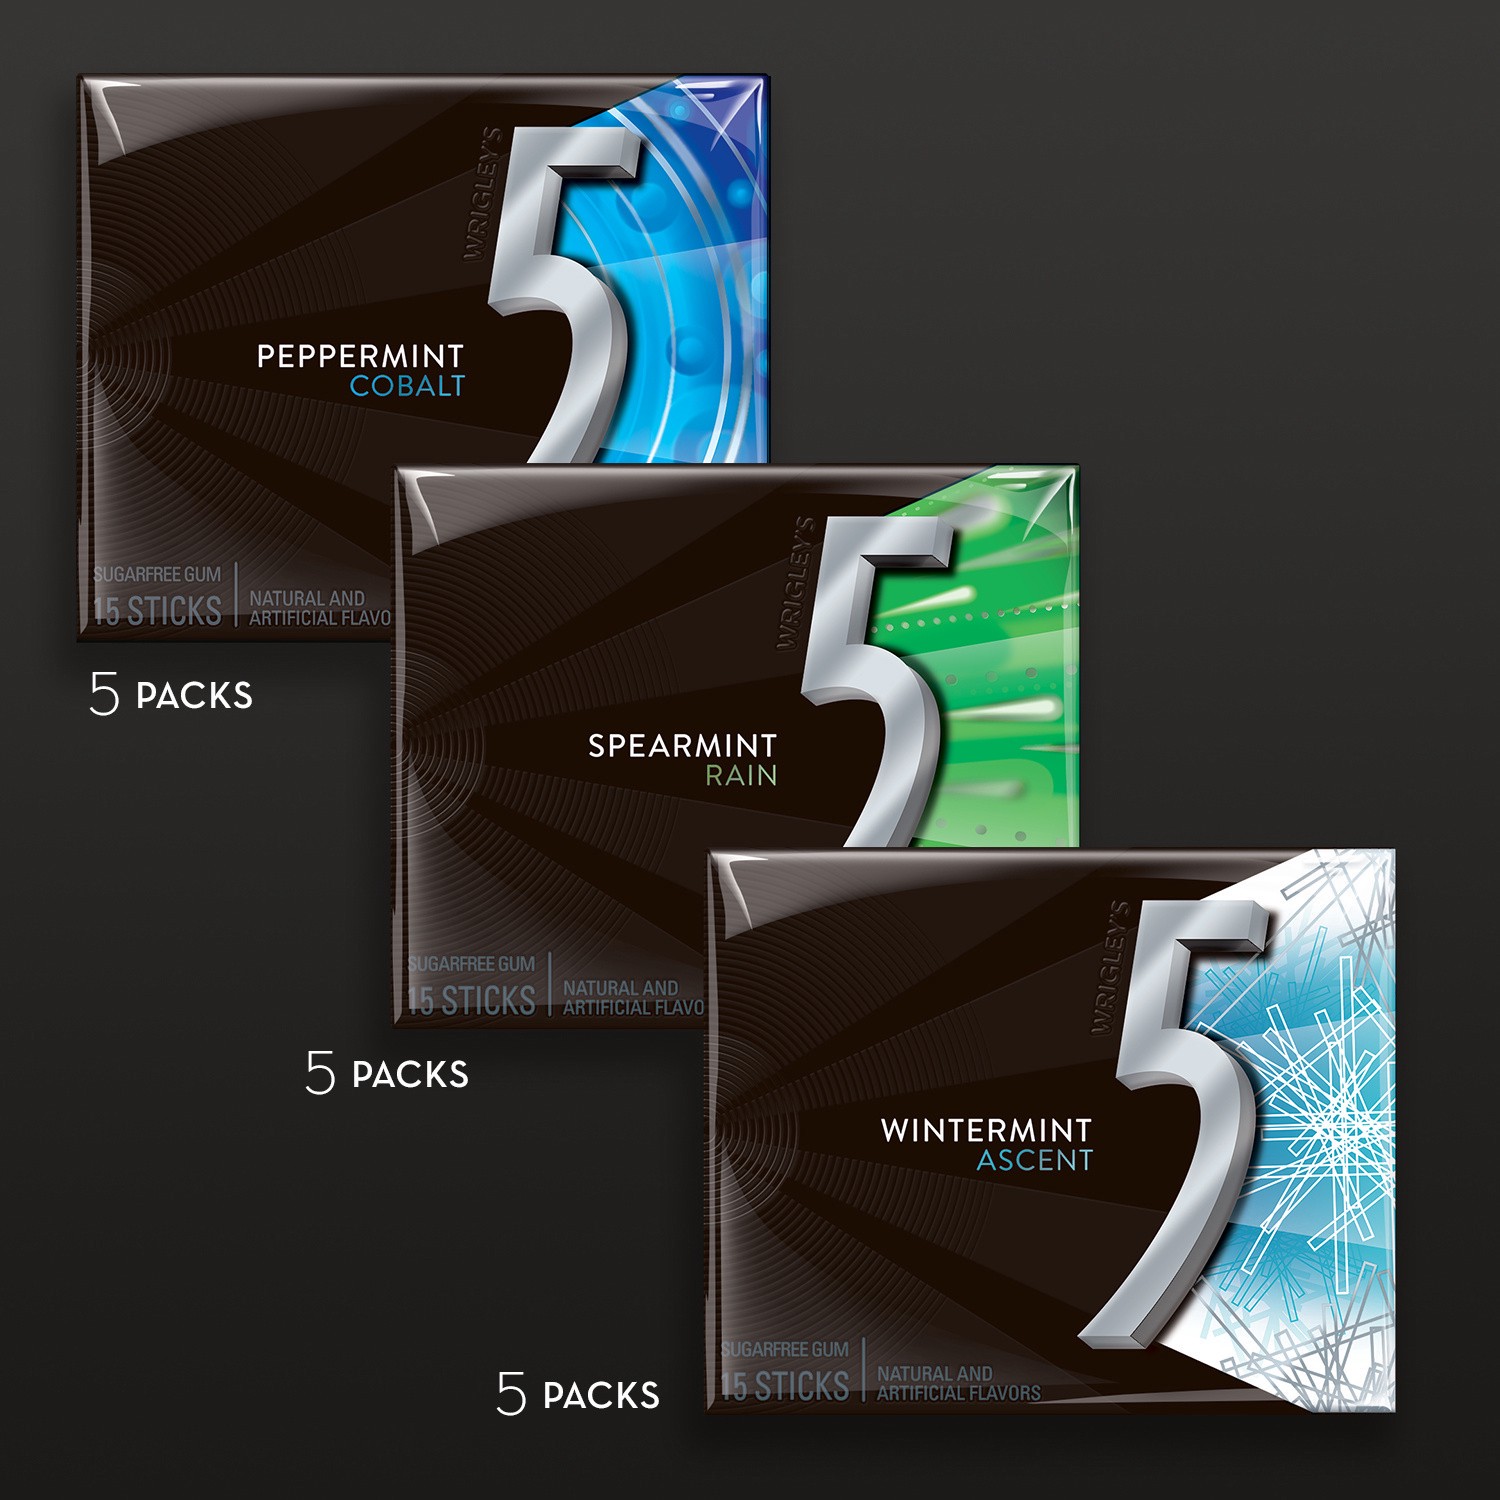 slide 2 of 5, 5 Gum Sugar Free Mint Chewing Gum Variety Pack, Peppermint, Spearmint, 15 pk, 15 ct